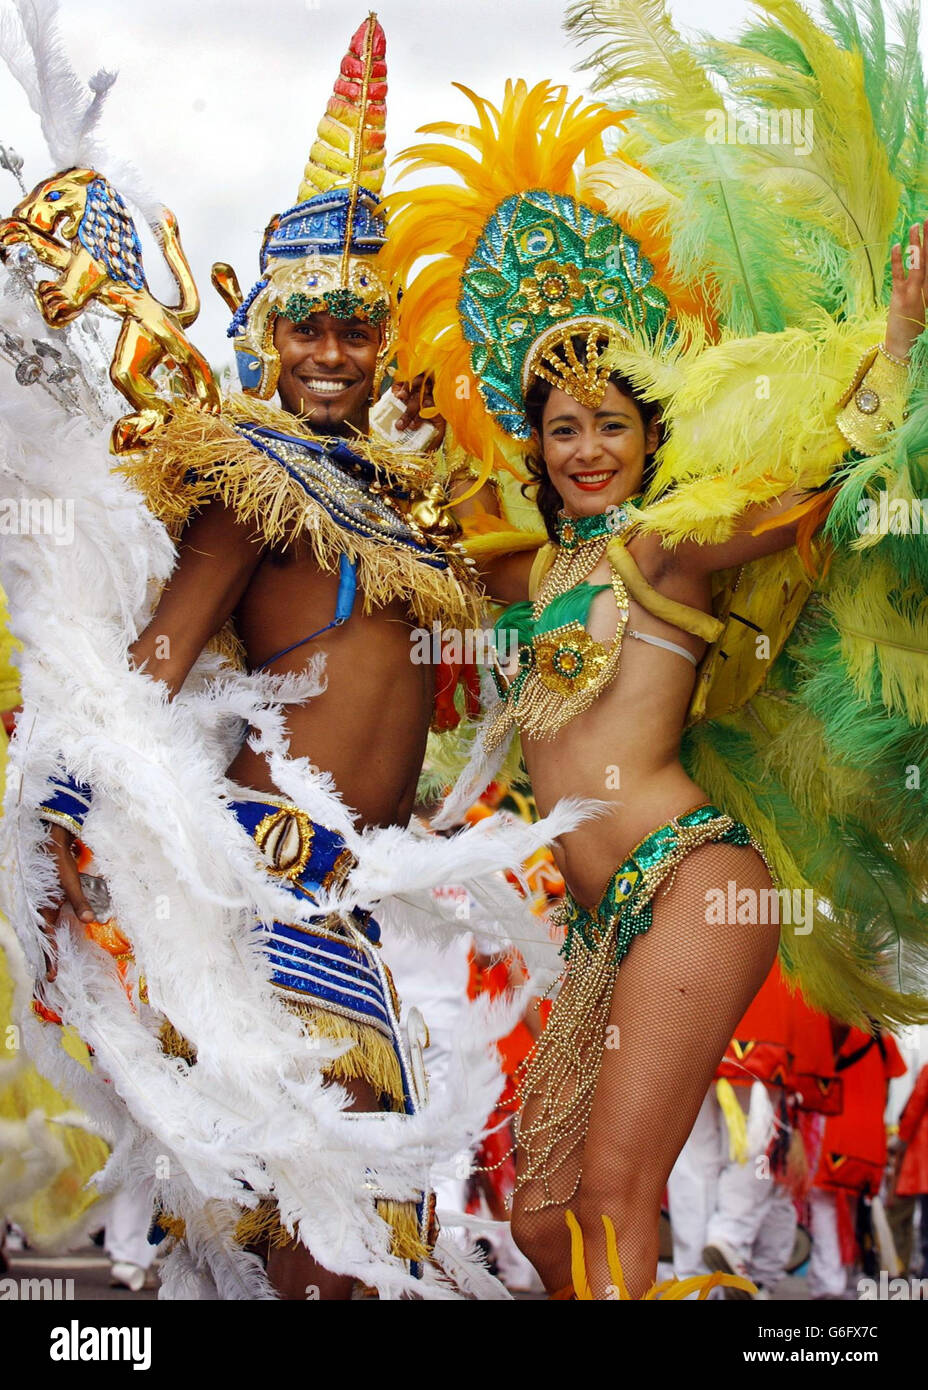 Dancers from the Paraiso dos Orixas Dance School, Rio de Janerio, Brazil, at the Notting Hill carnival in London. Around one million revellers were expected at the final day of the Notting Hill Carnival which kicked off at noon in a burst of vibrant colour, elaborate costumes and thunderous Caribbean music.Europe's largest and most celebrated street party, which has been taking place in London for the last 38-years, was reaching its pinnacle with the heart of West London becoming a kaleidoscope of the best in contemporary urban music. Stock Photo